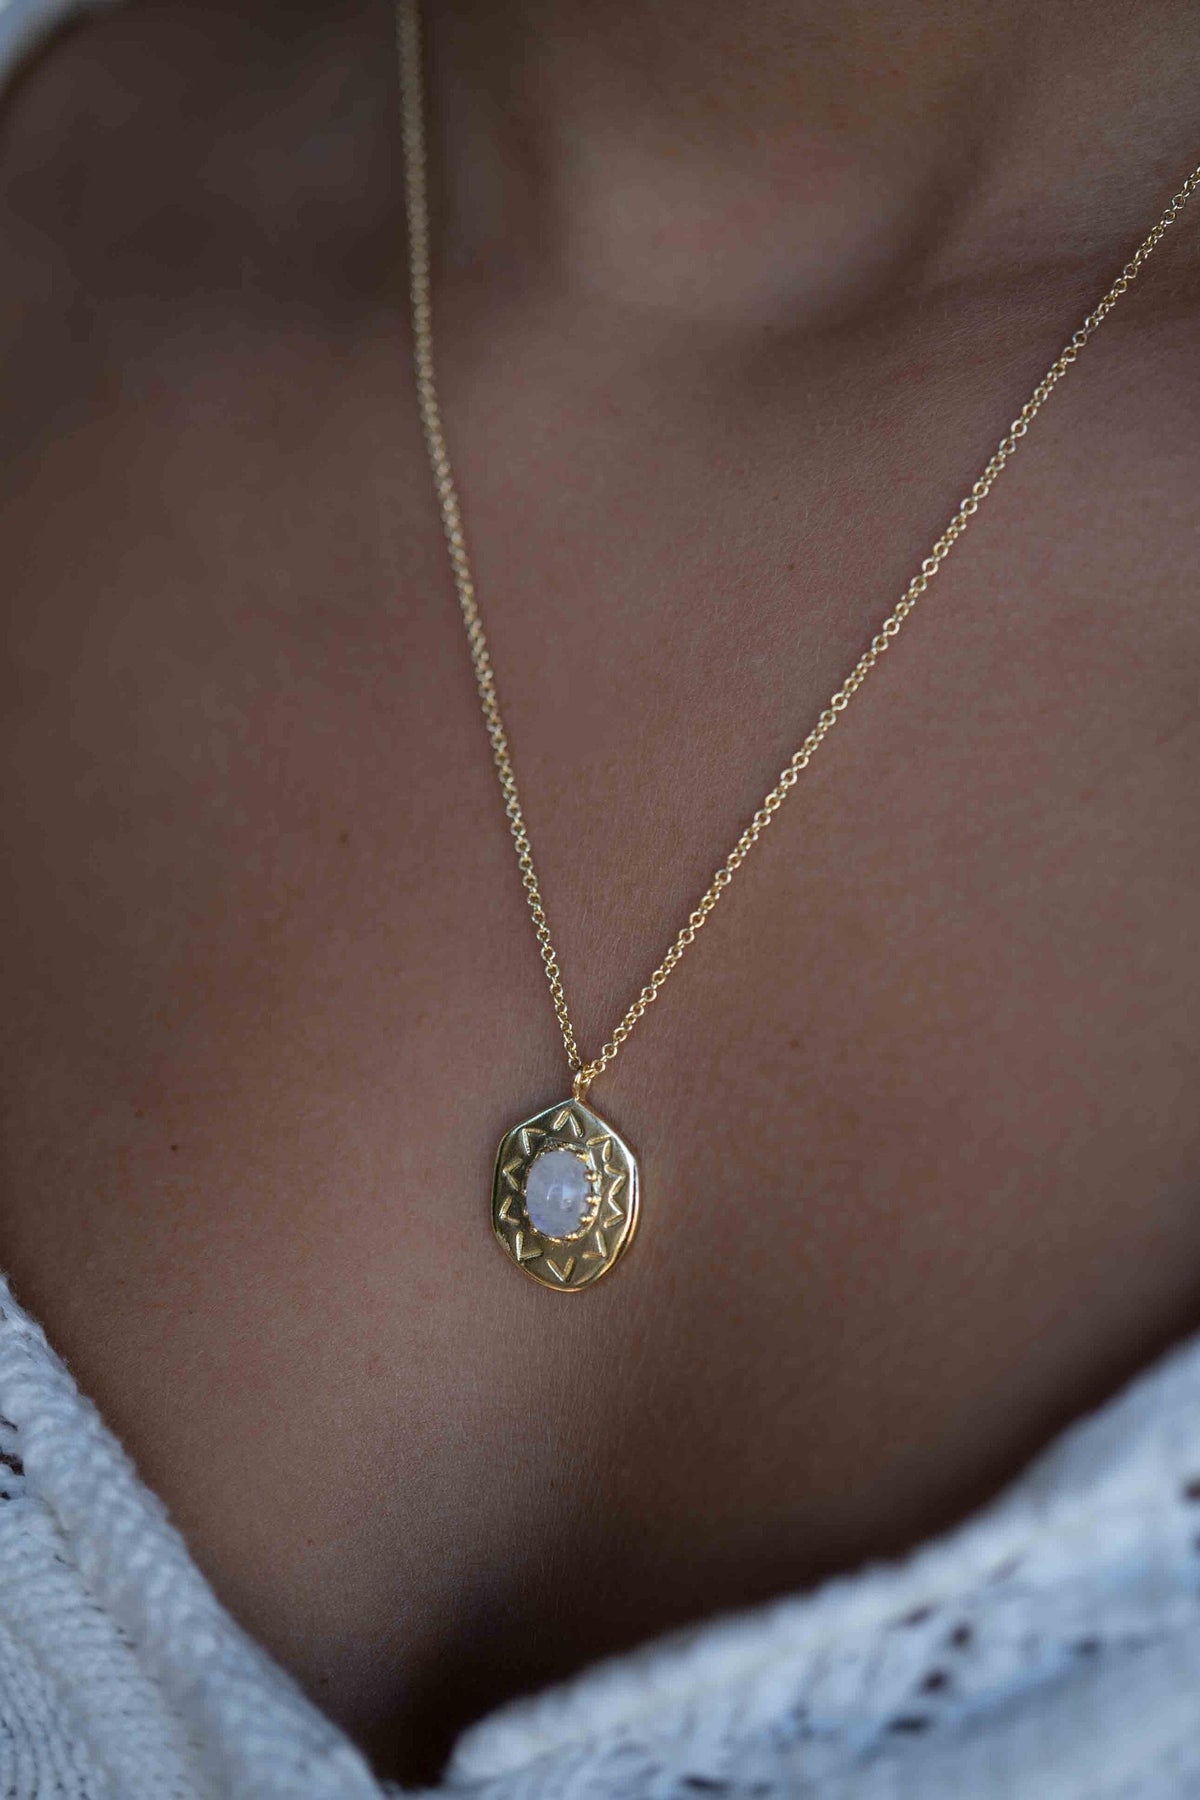 Moonstone, Labradorite or Aqua Chalcedony  Necklace * Dotted chain Gold Plated 18k * Gemstone * Modern * Layered * BJN108